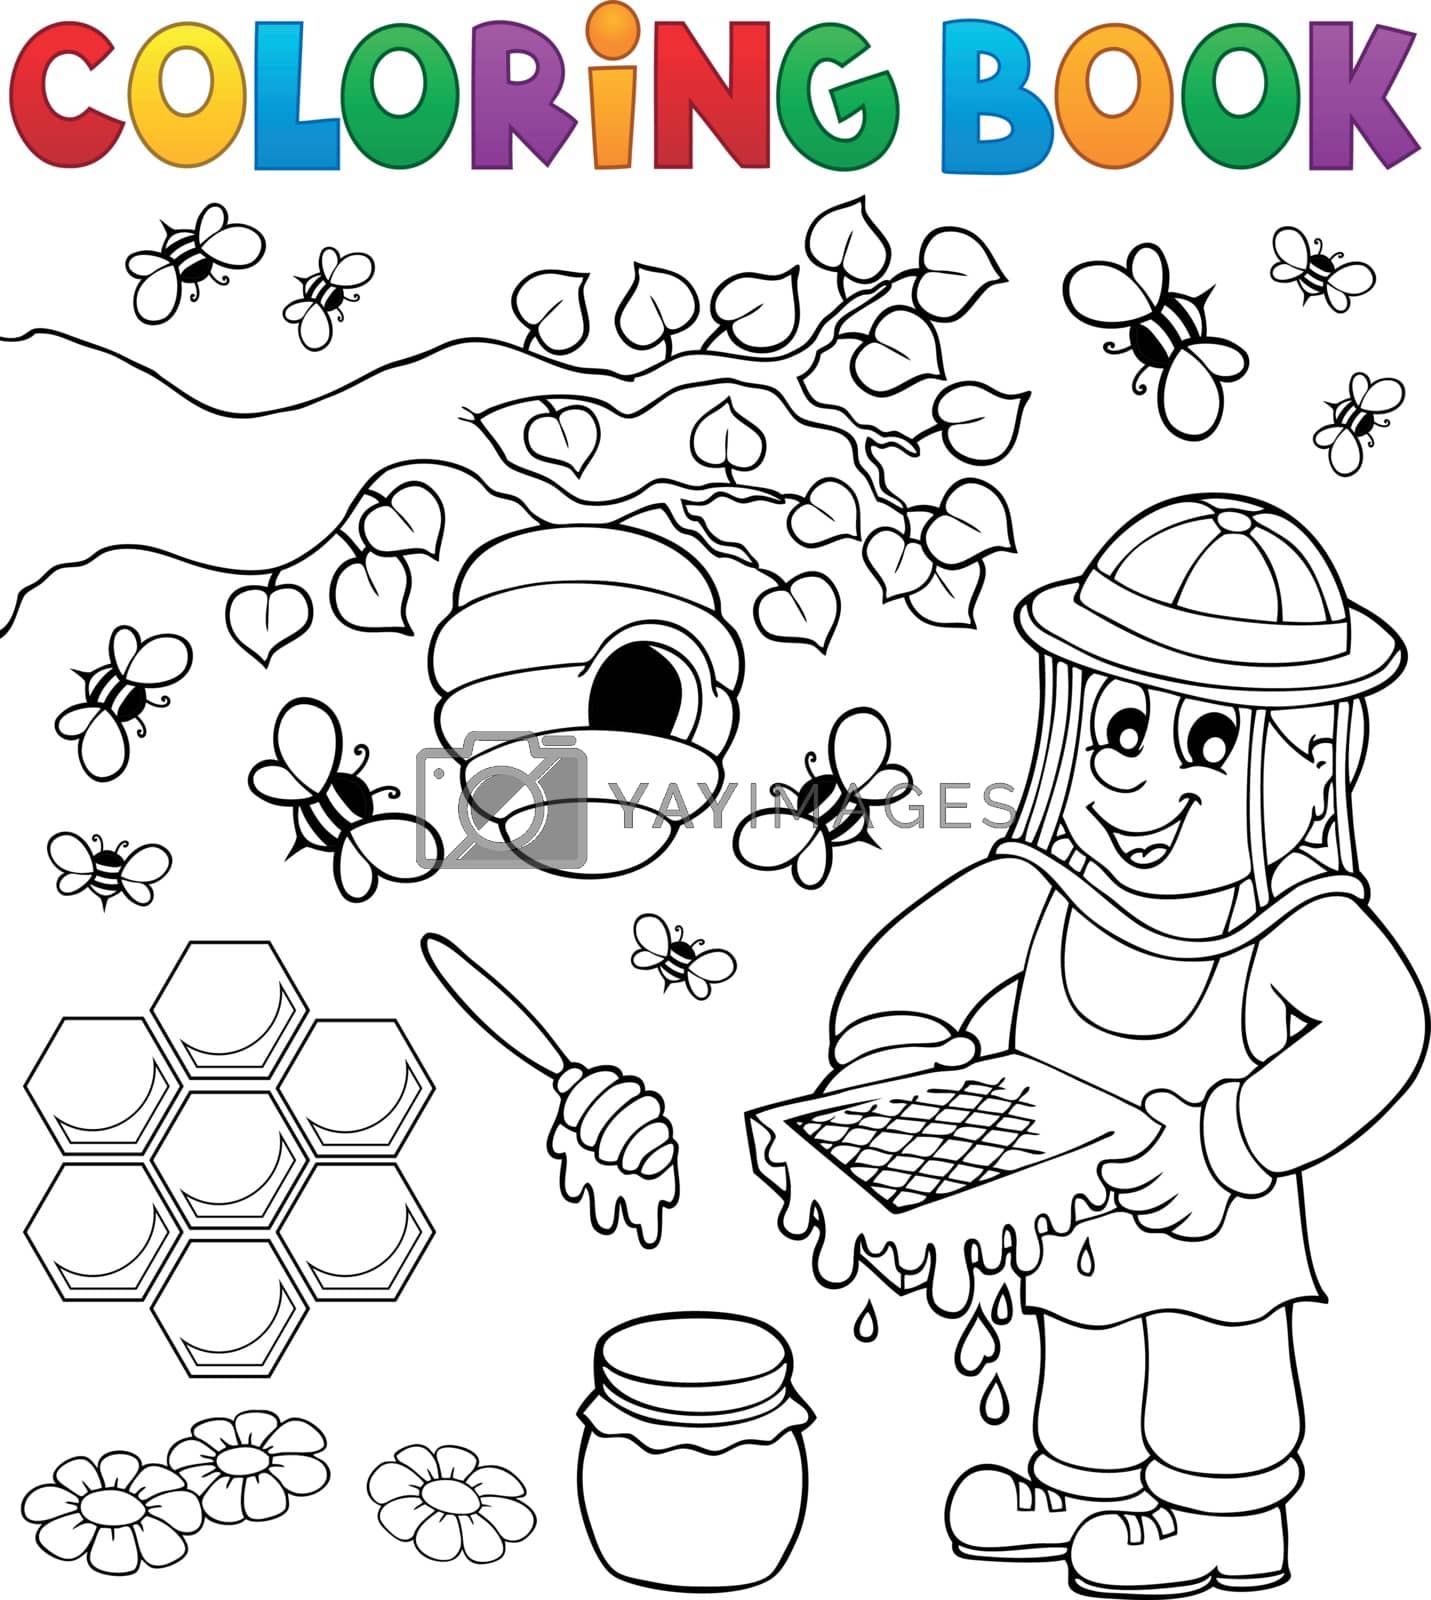 Royalty free image of Coloring book with beekeeper by clairev